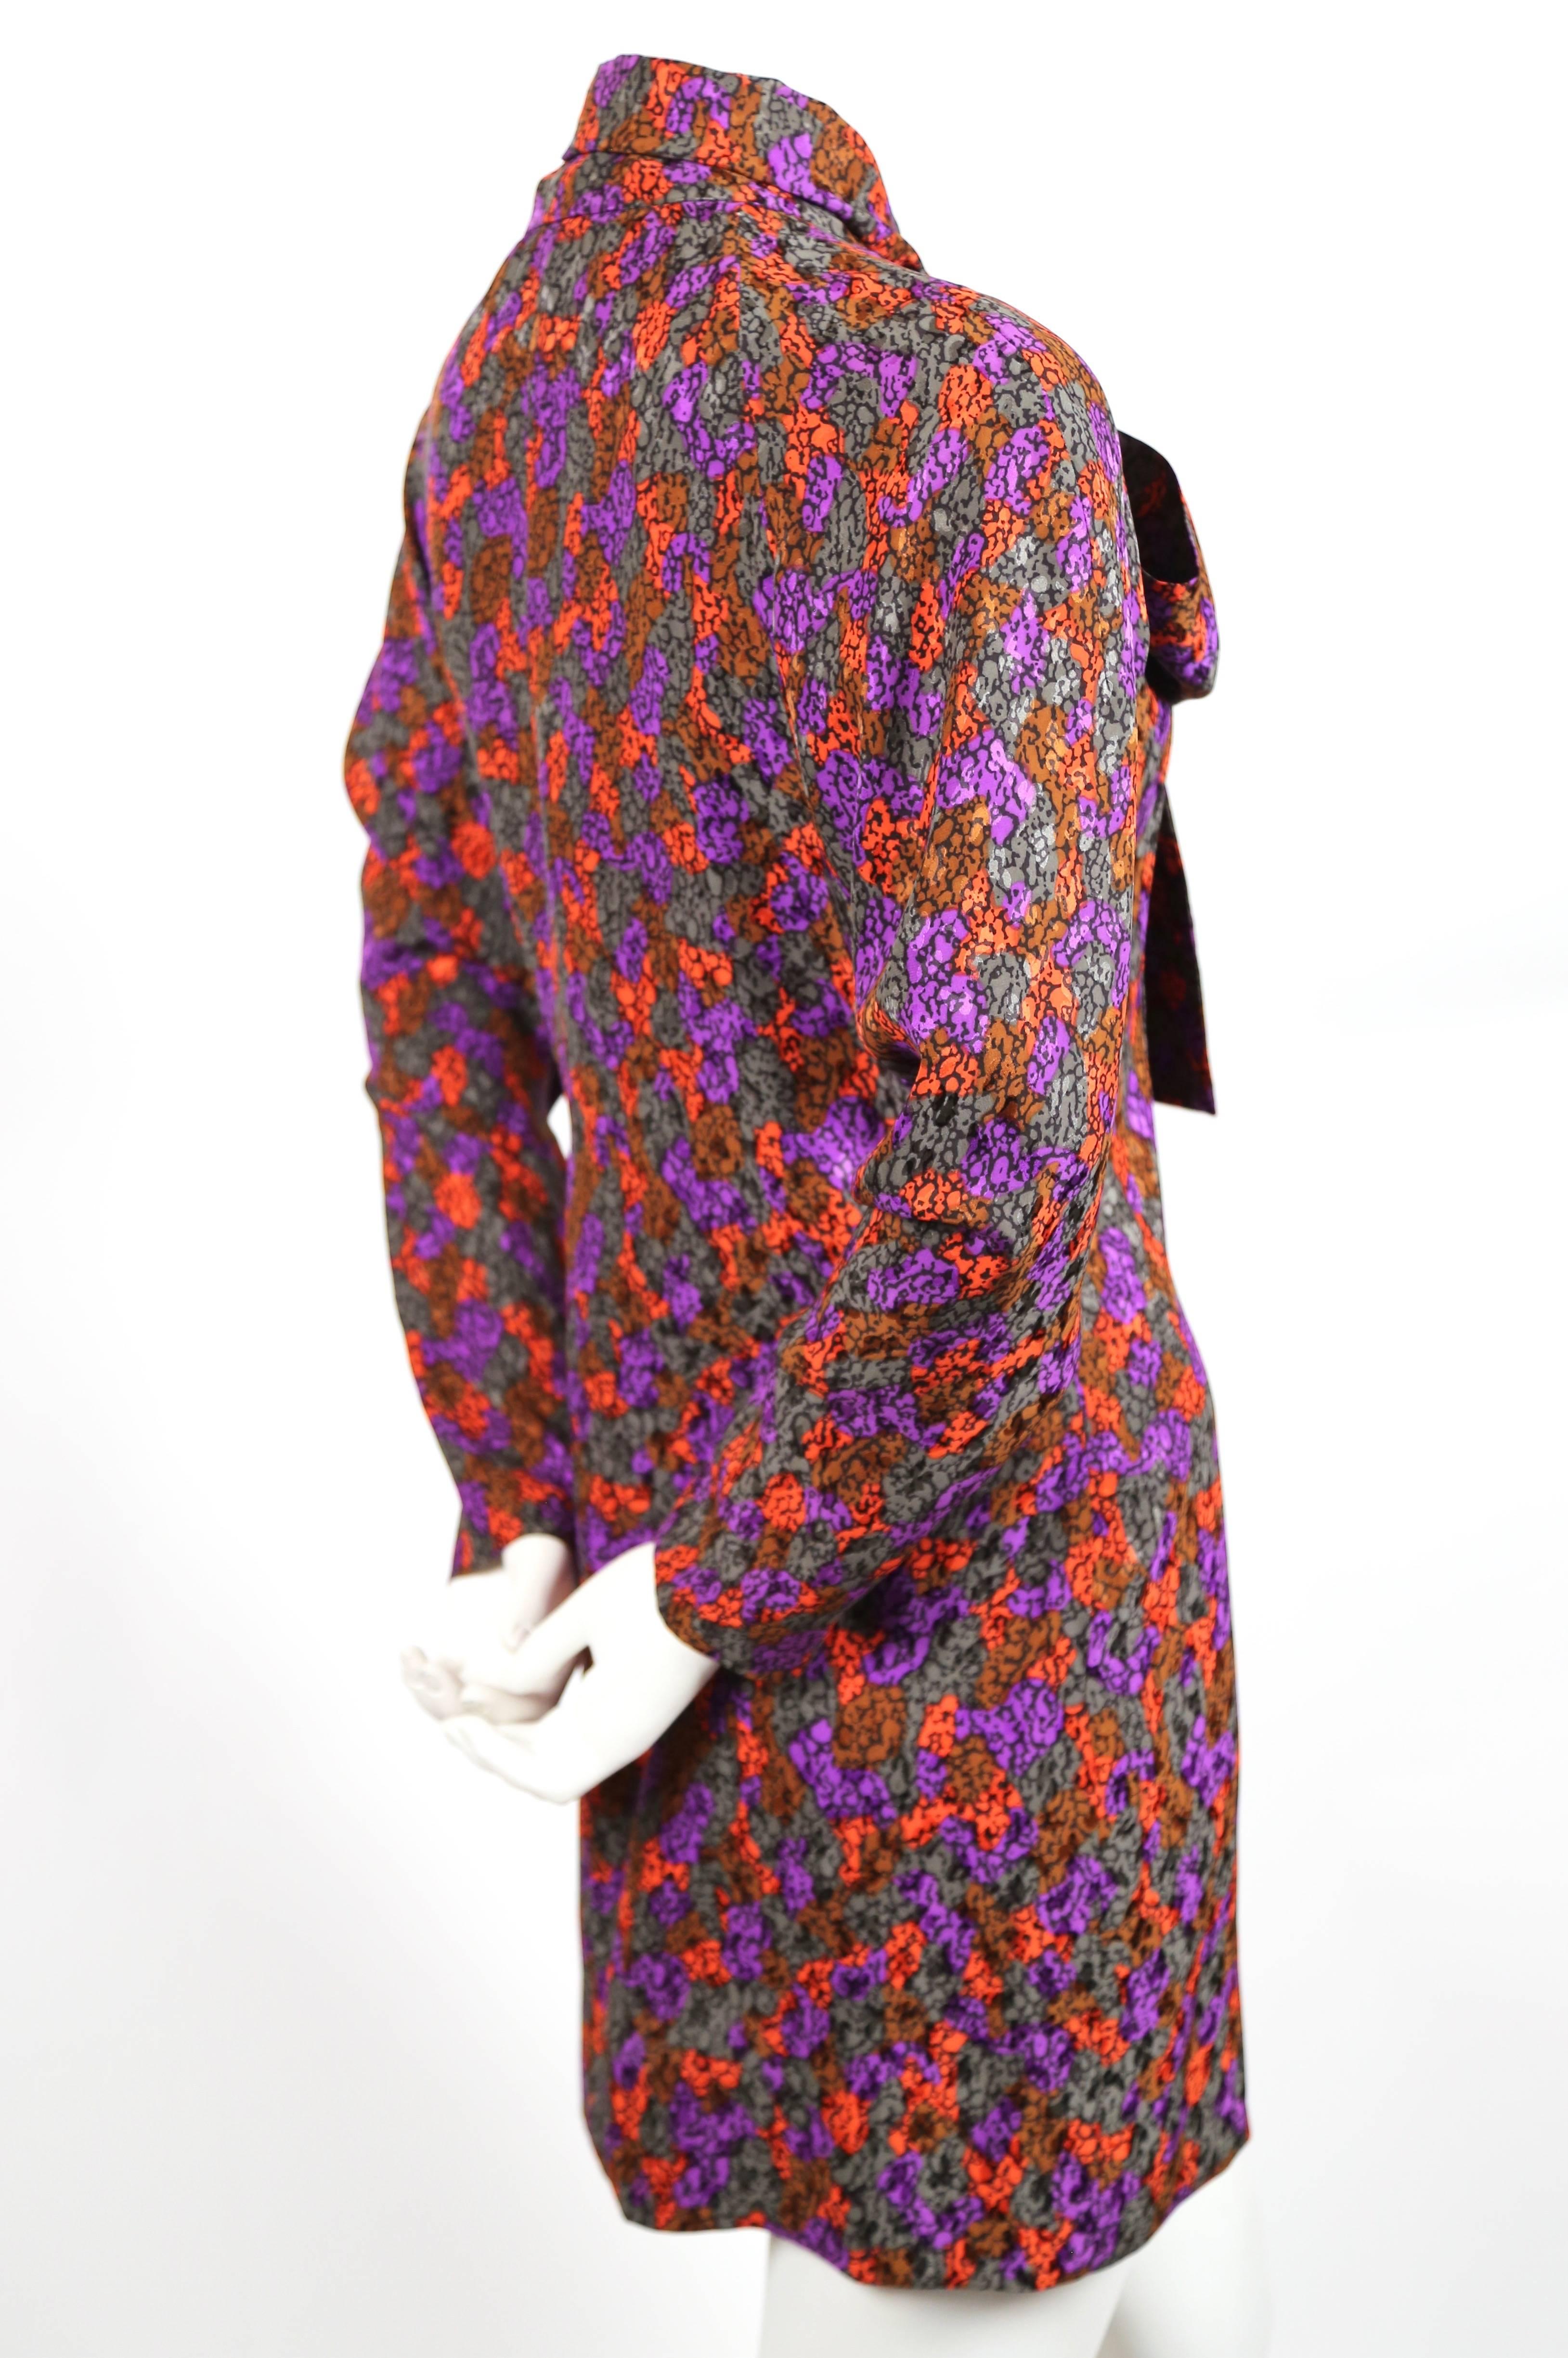 Vivid abstract printed silk mini dress with pussy bow tie from Yves Saint Laurent dating to the late 1970's, early 1980's. No size is indicated however this would best fit a US 4-6. Approximate measurements: bust 38", waist 35", hips